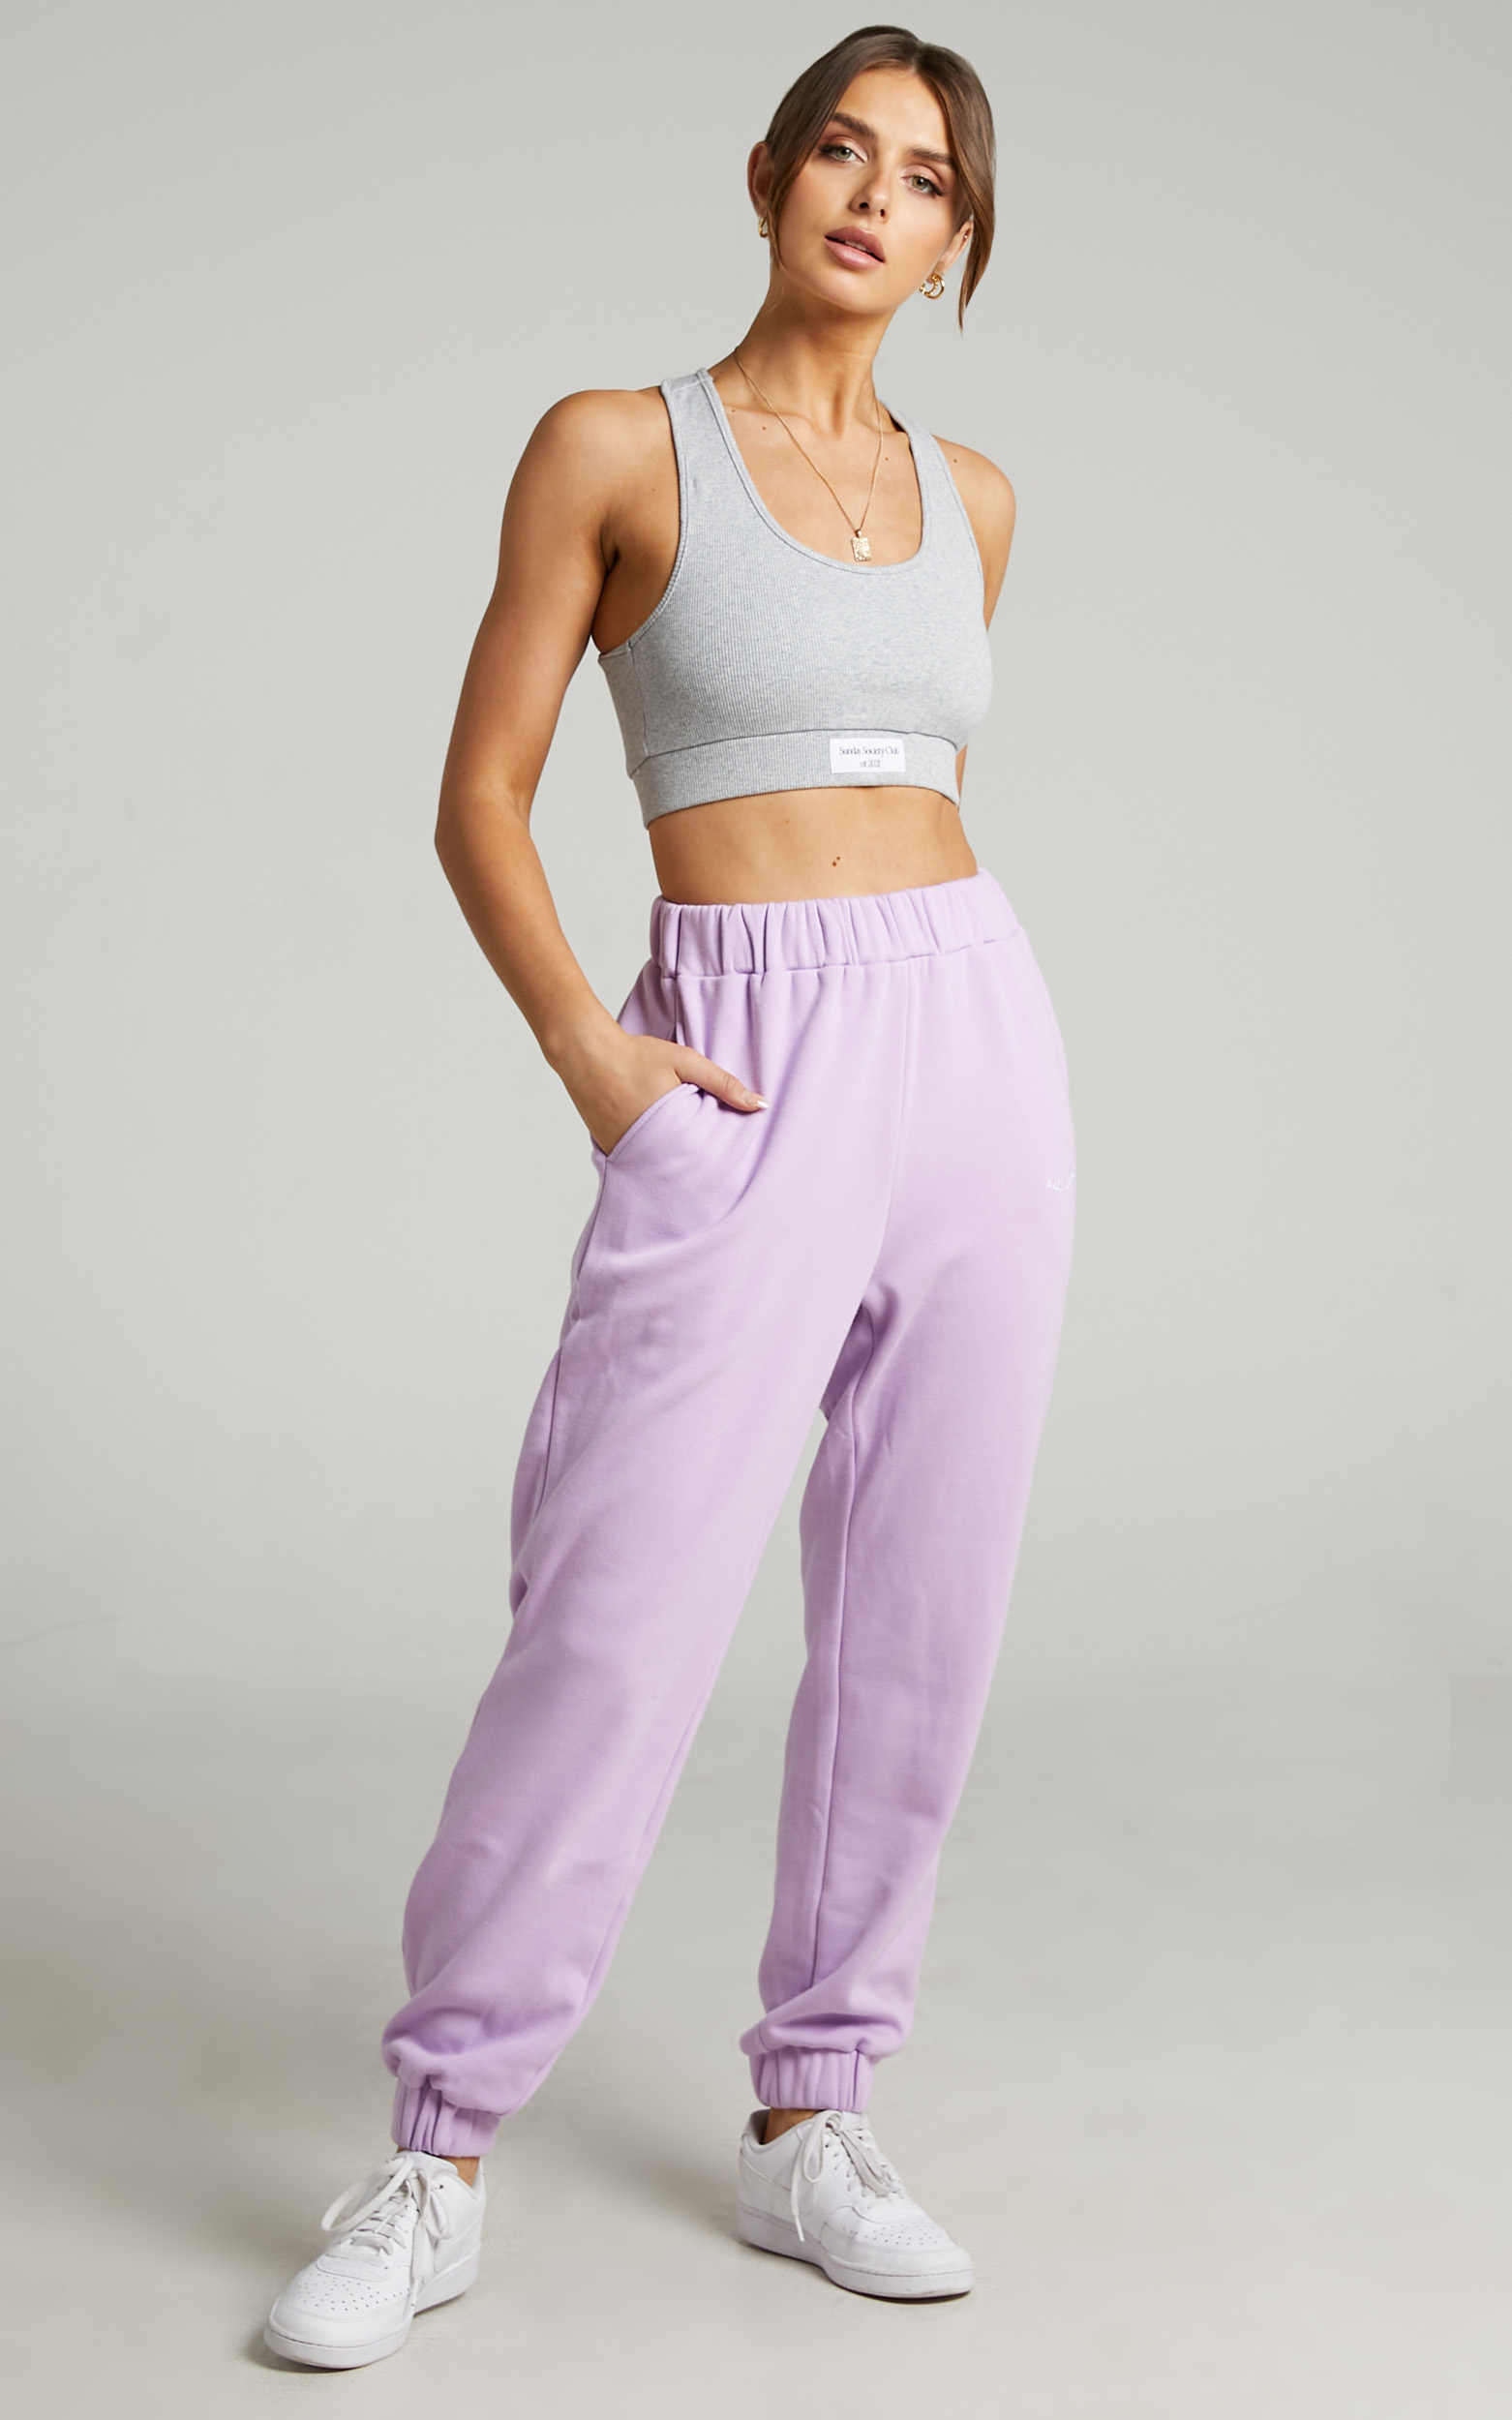 Sunday Society Club - Maddie Sweatpants in Lilac - 06, PRP7, hi-res image number null